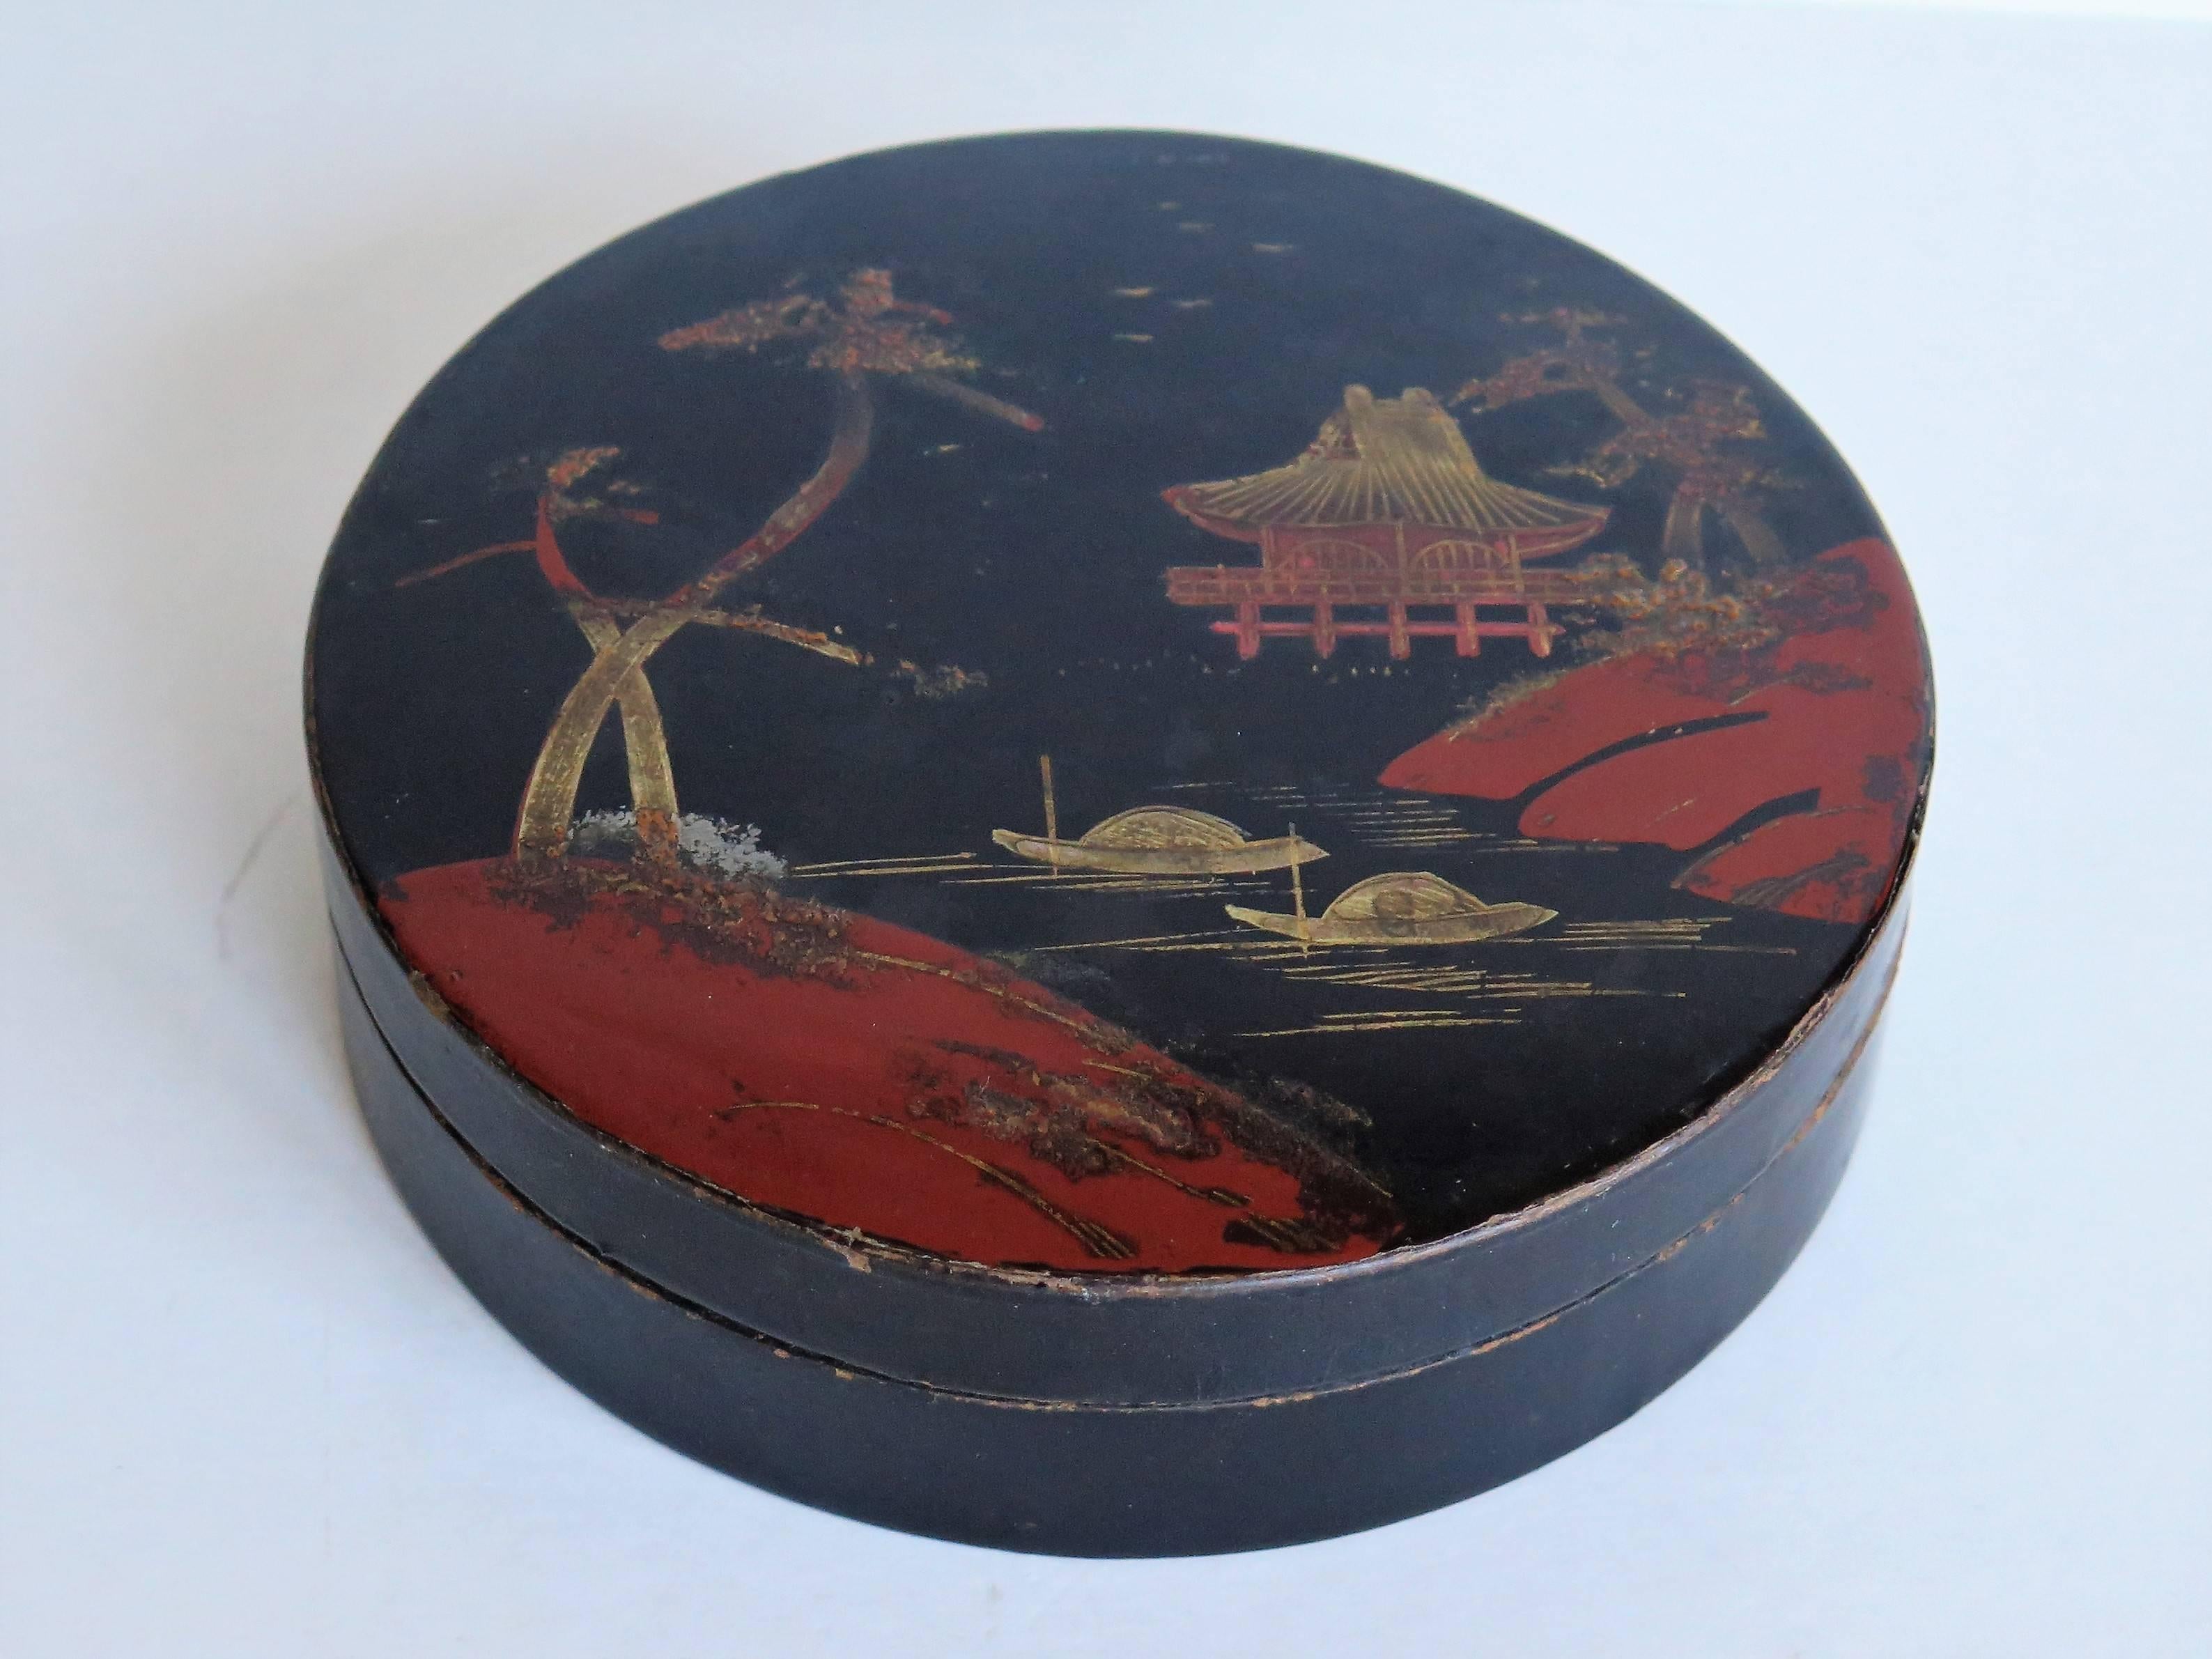 This is a beautiful papier mâché, circular lacquered lidded box, which we attribute to being made in Japan during the early 20th century, circa 1910.

This is a very decorative box with a delicately hand-painted waterside scene of a pagoda or